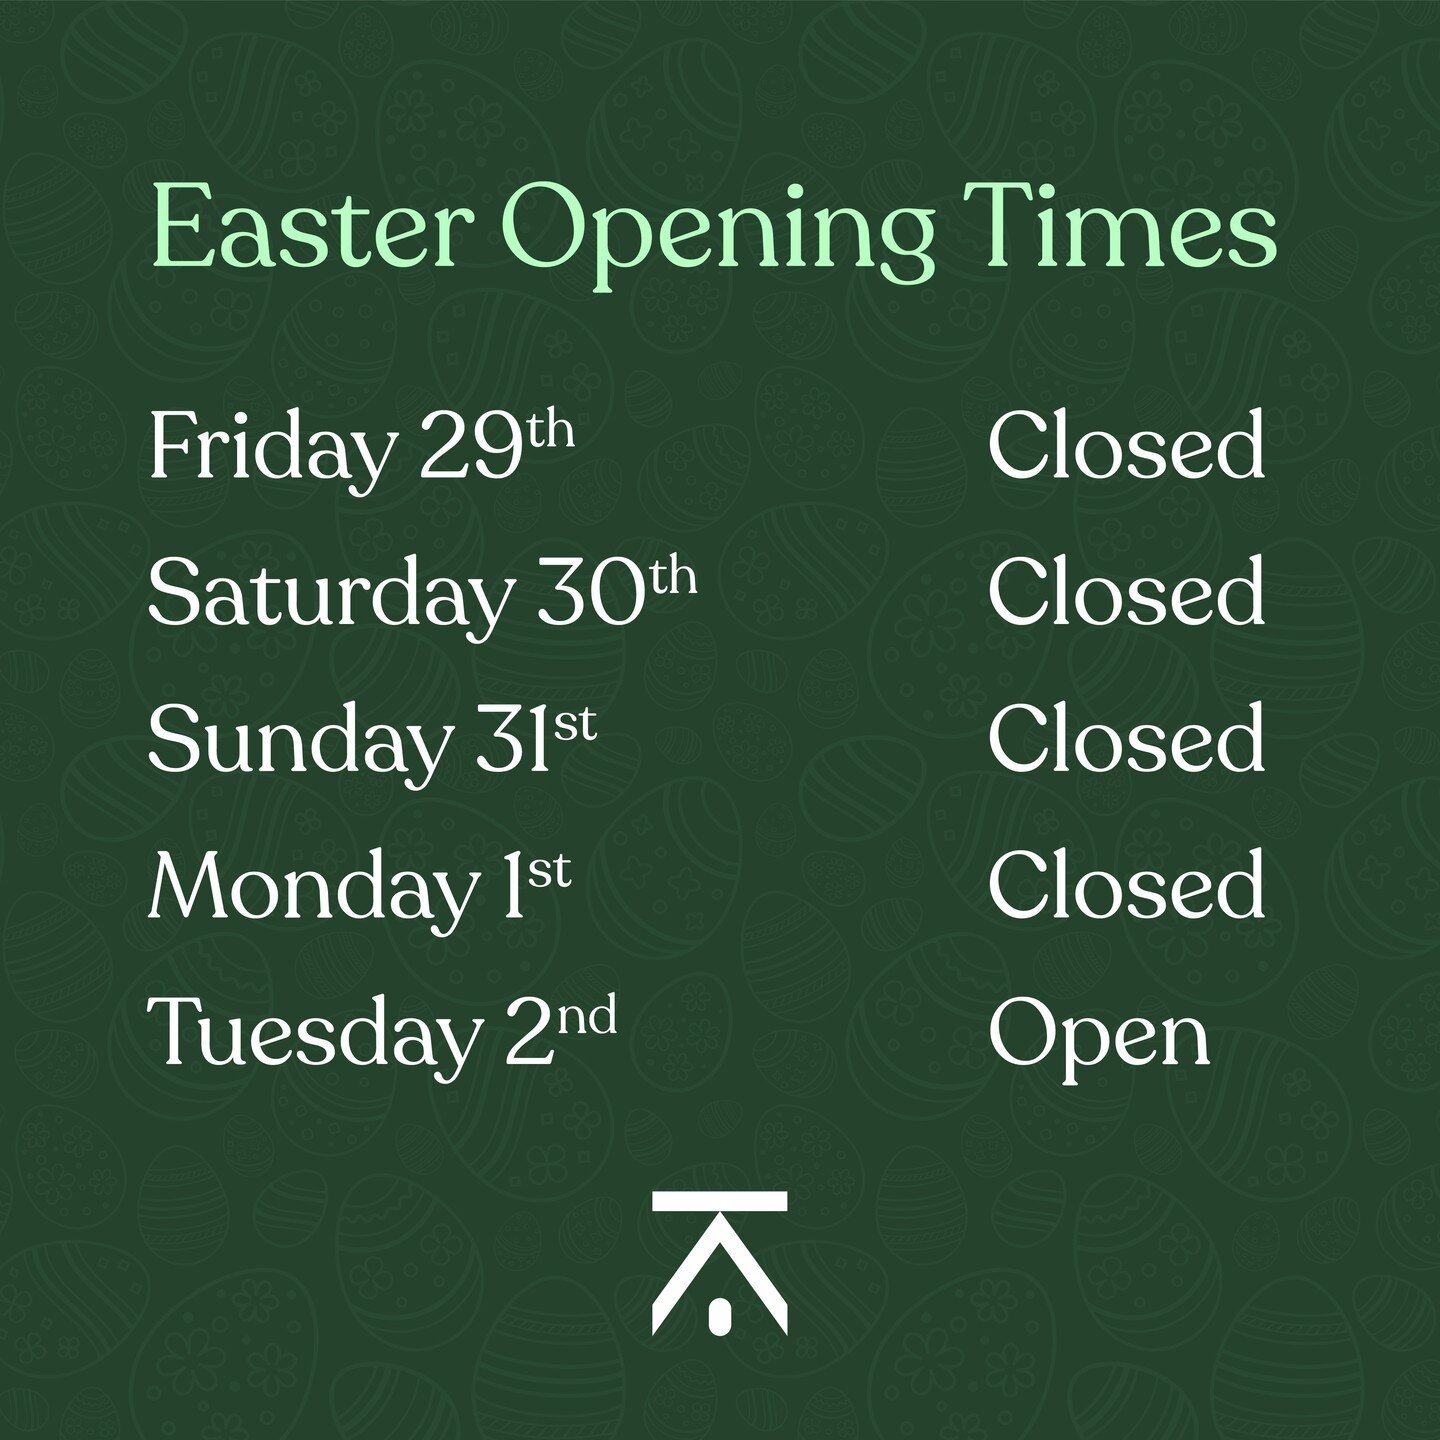 With Easter only a few days away, Keops will be closing its doors for the holiday! 🐣

After our recent exhibition @hbr_show, we&rsquo;re taking a well-earned break over the Easter period. 

Our offices will be closed from Good Friday (29th March) to